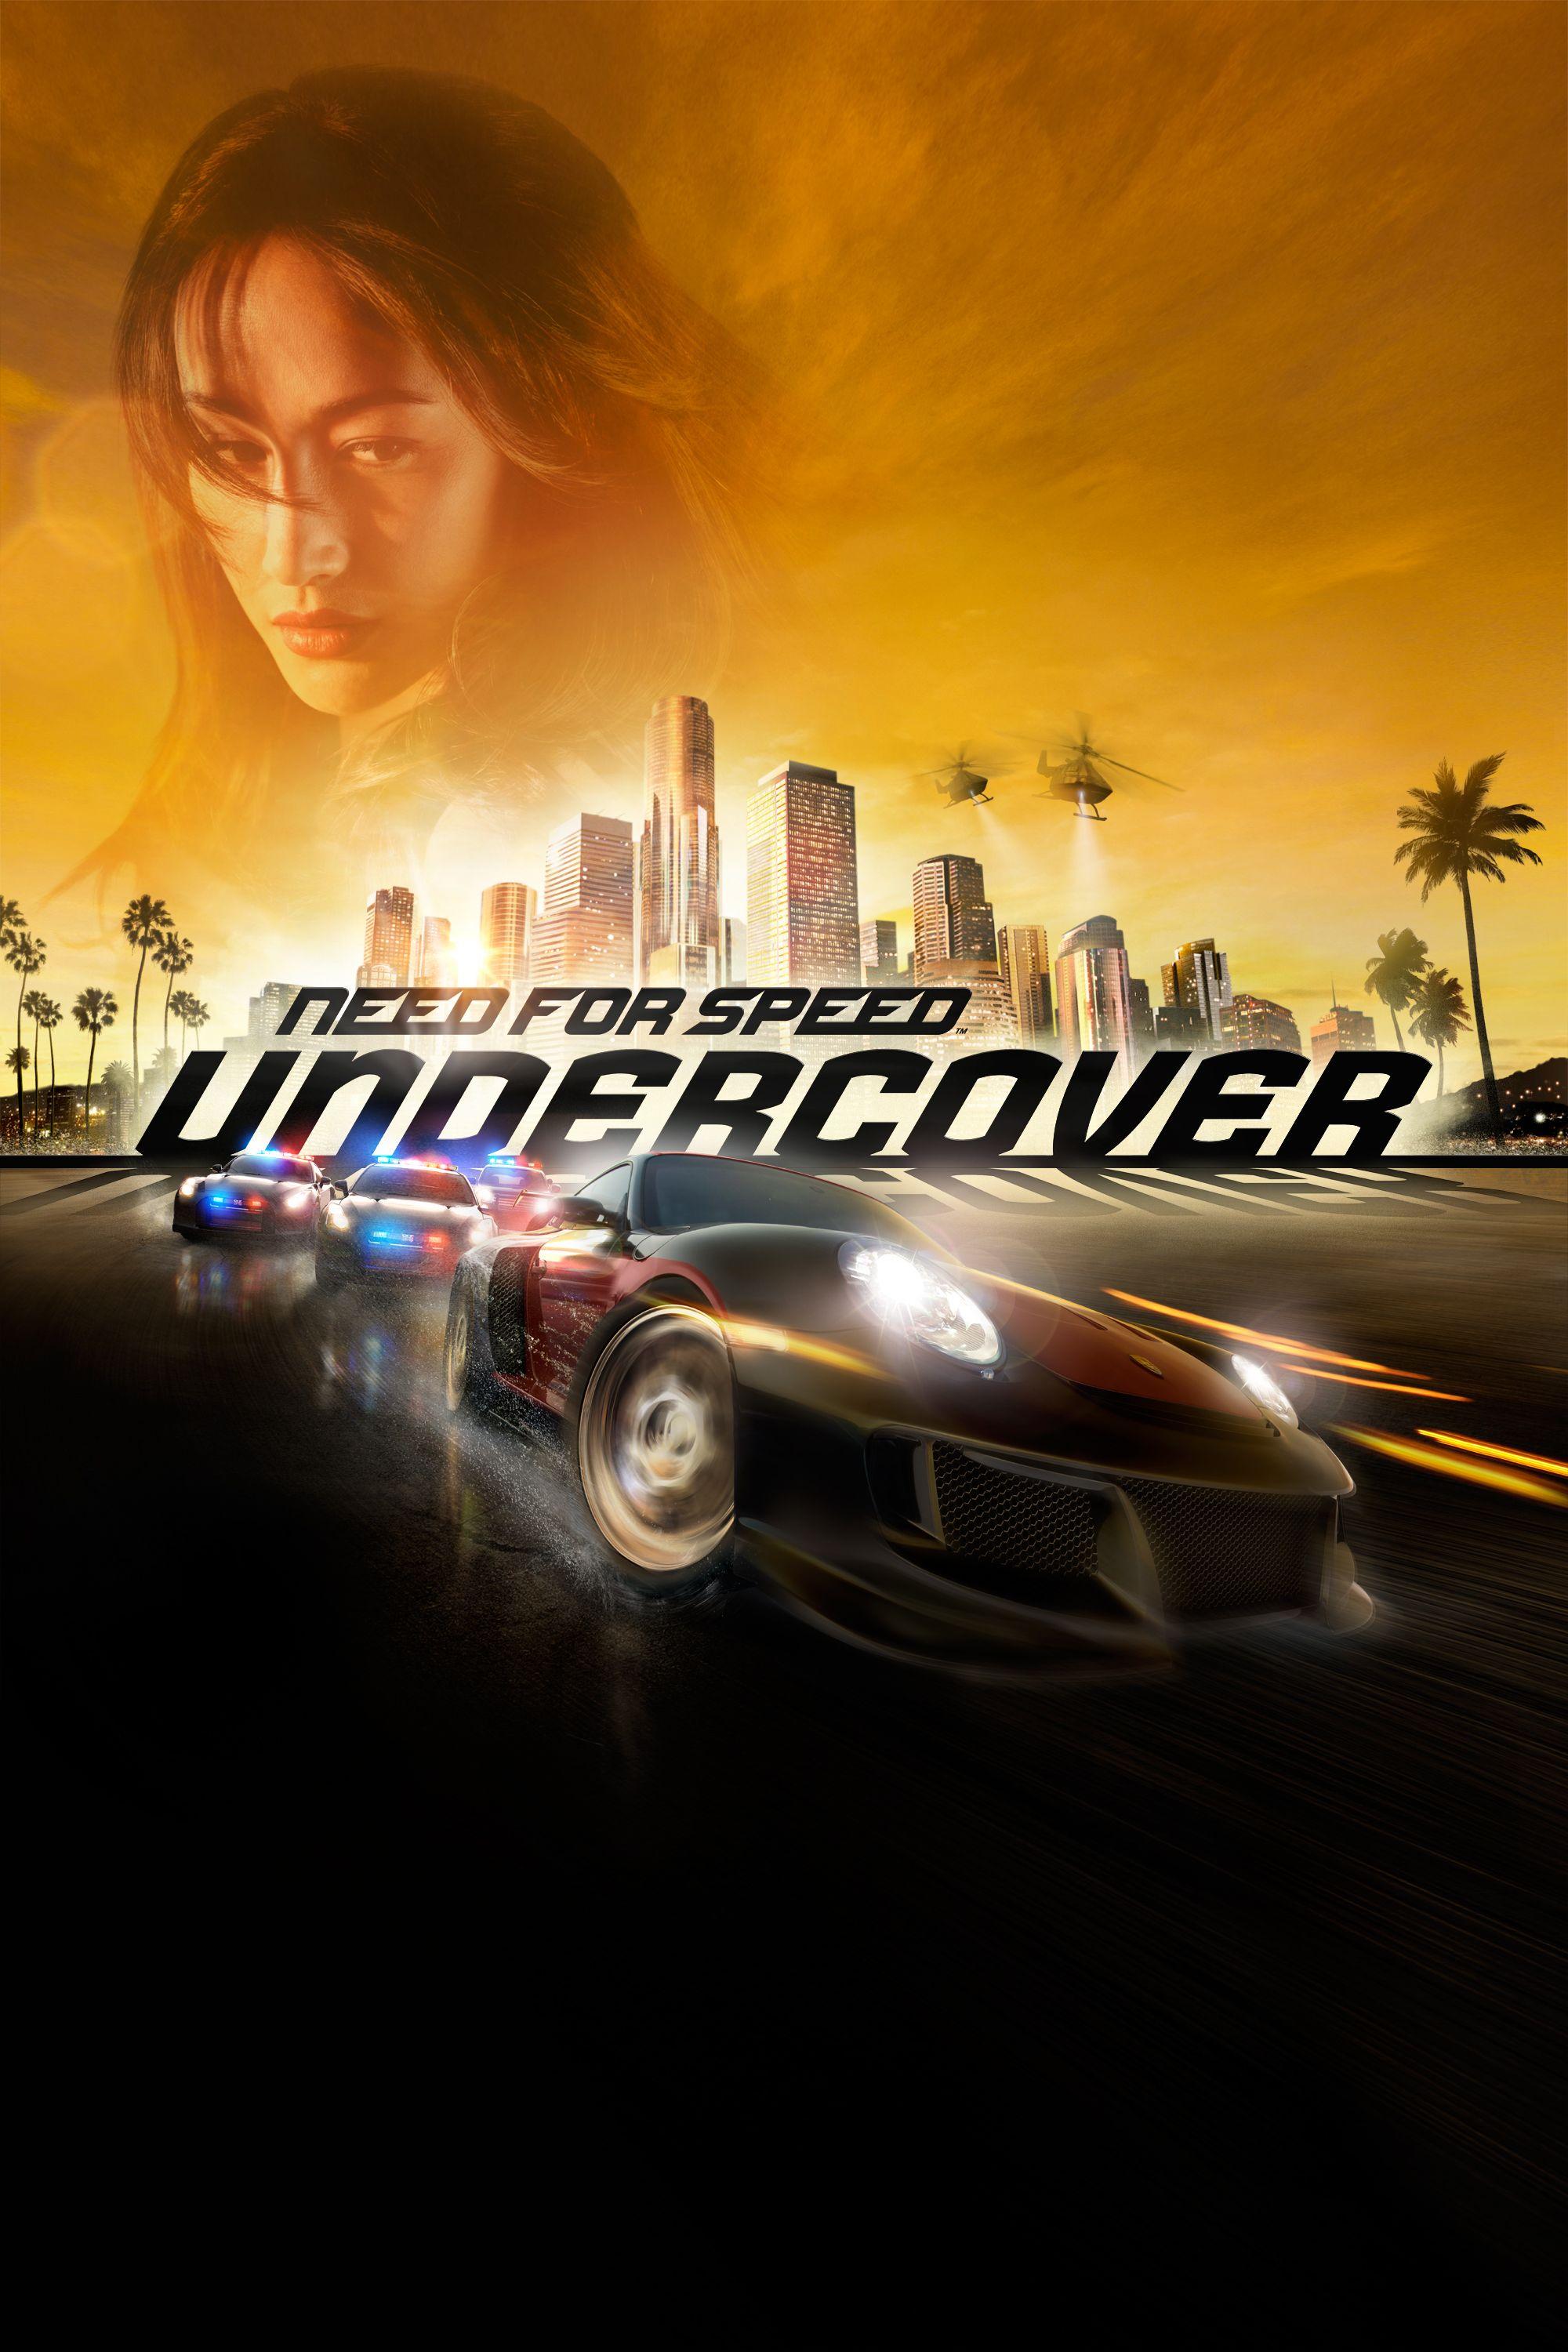 Need for Speed Undercover Logo - Need for Speed: Undercover. Need for Speed